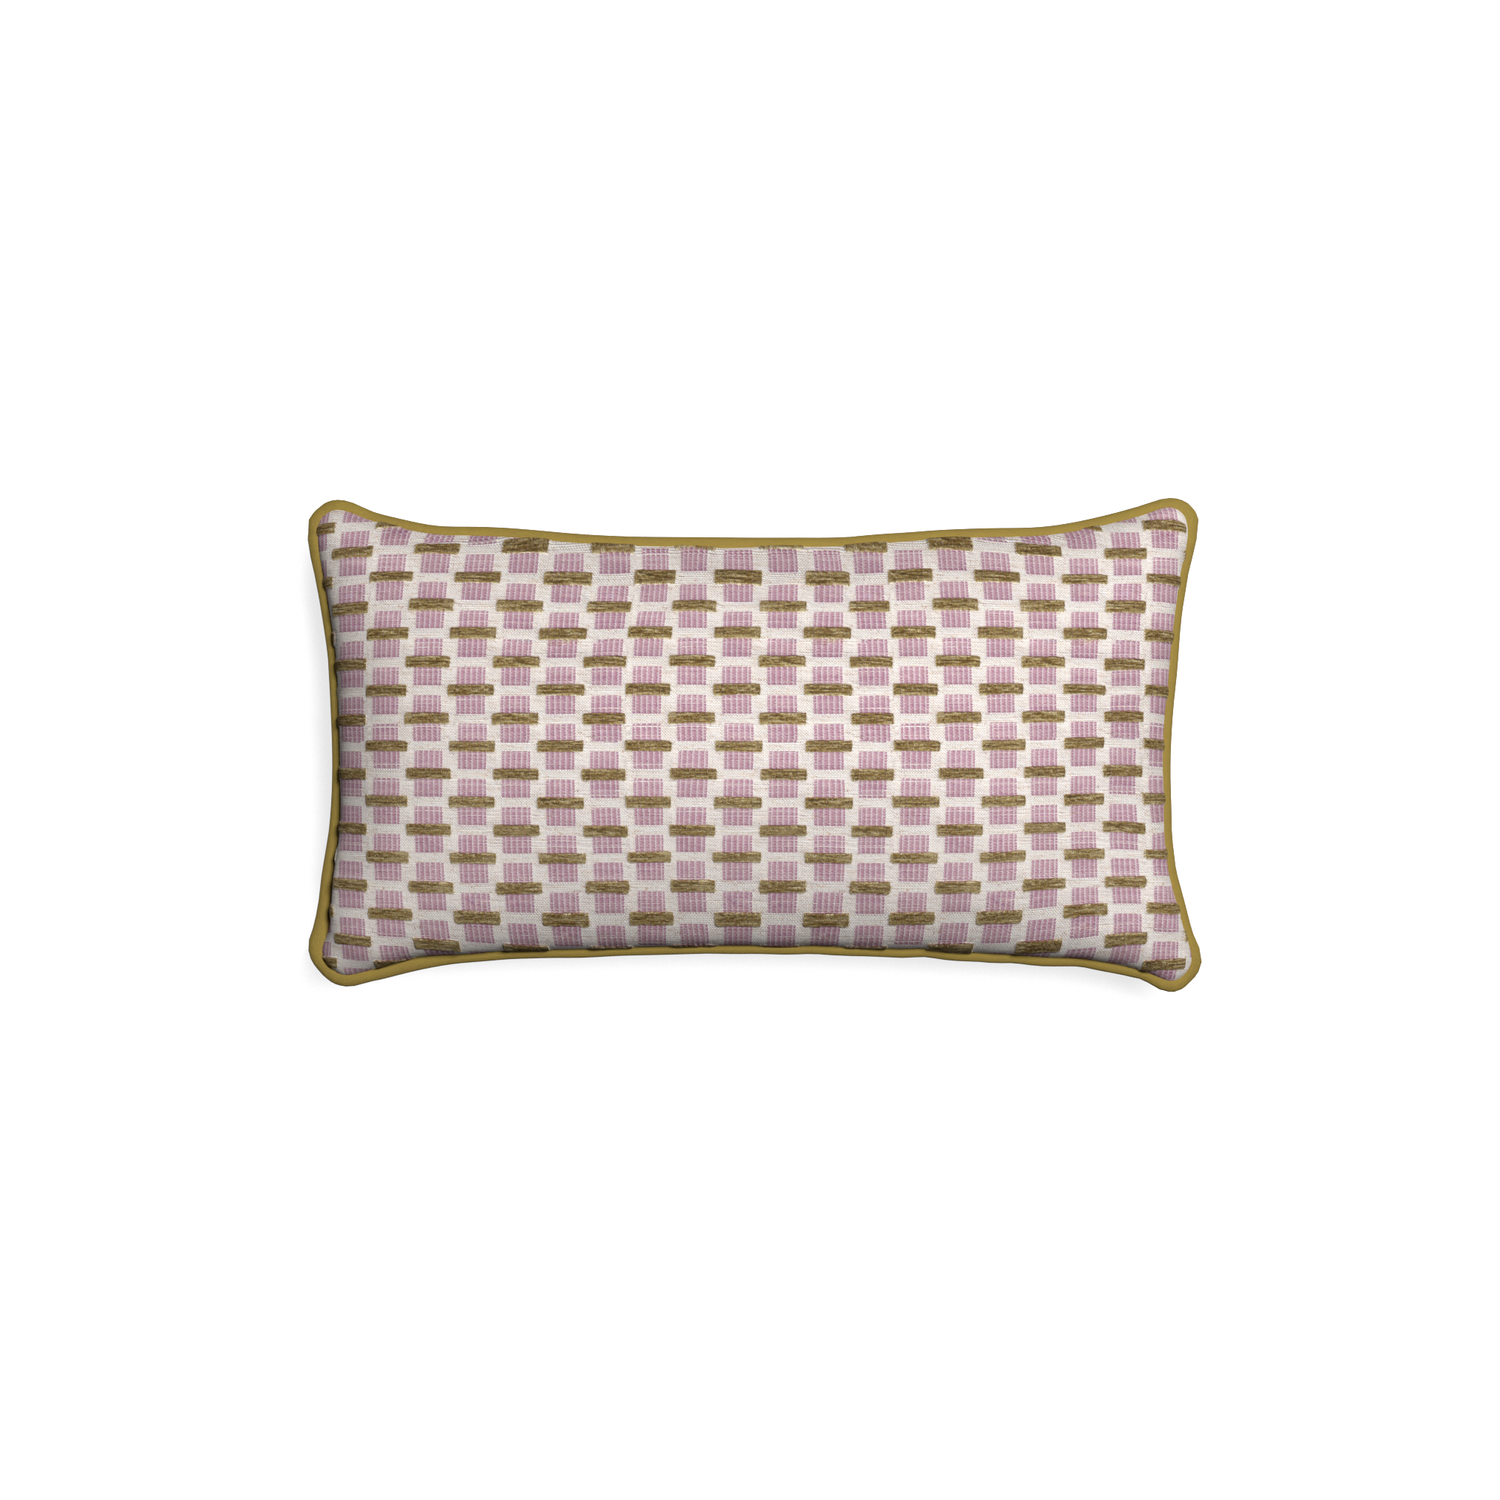 Petite-lumbar willow orchid custom pink geometric chenillepillow with c piping on white background